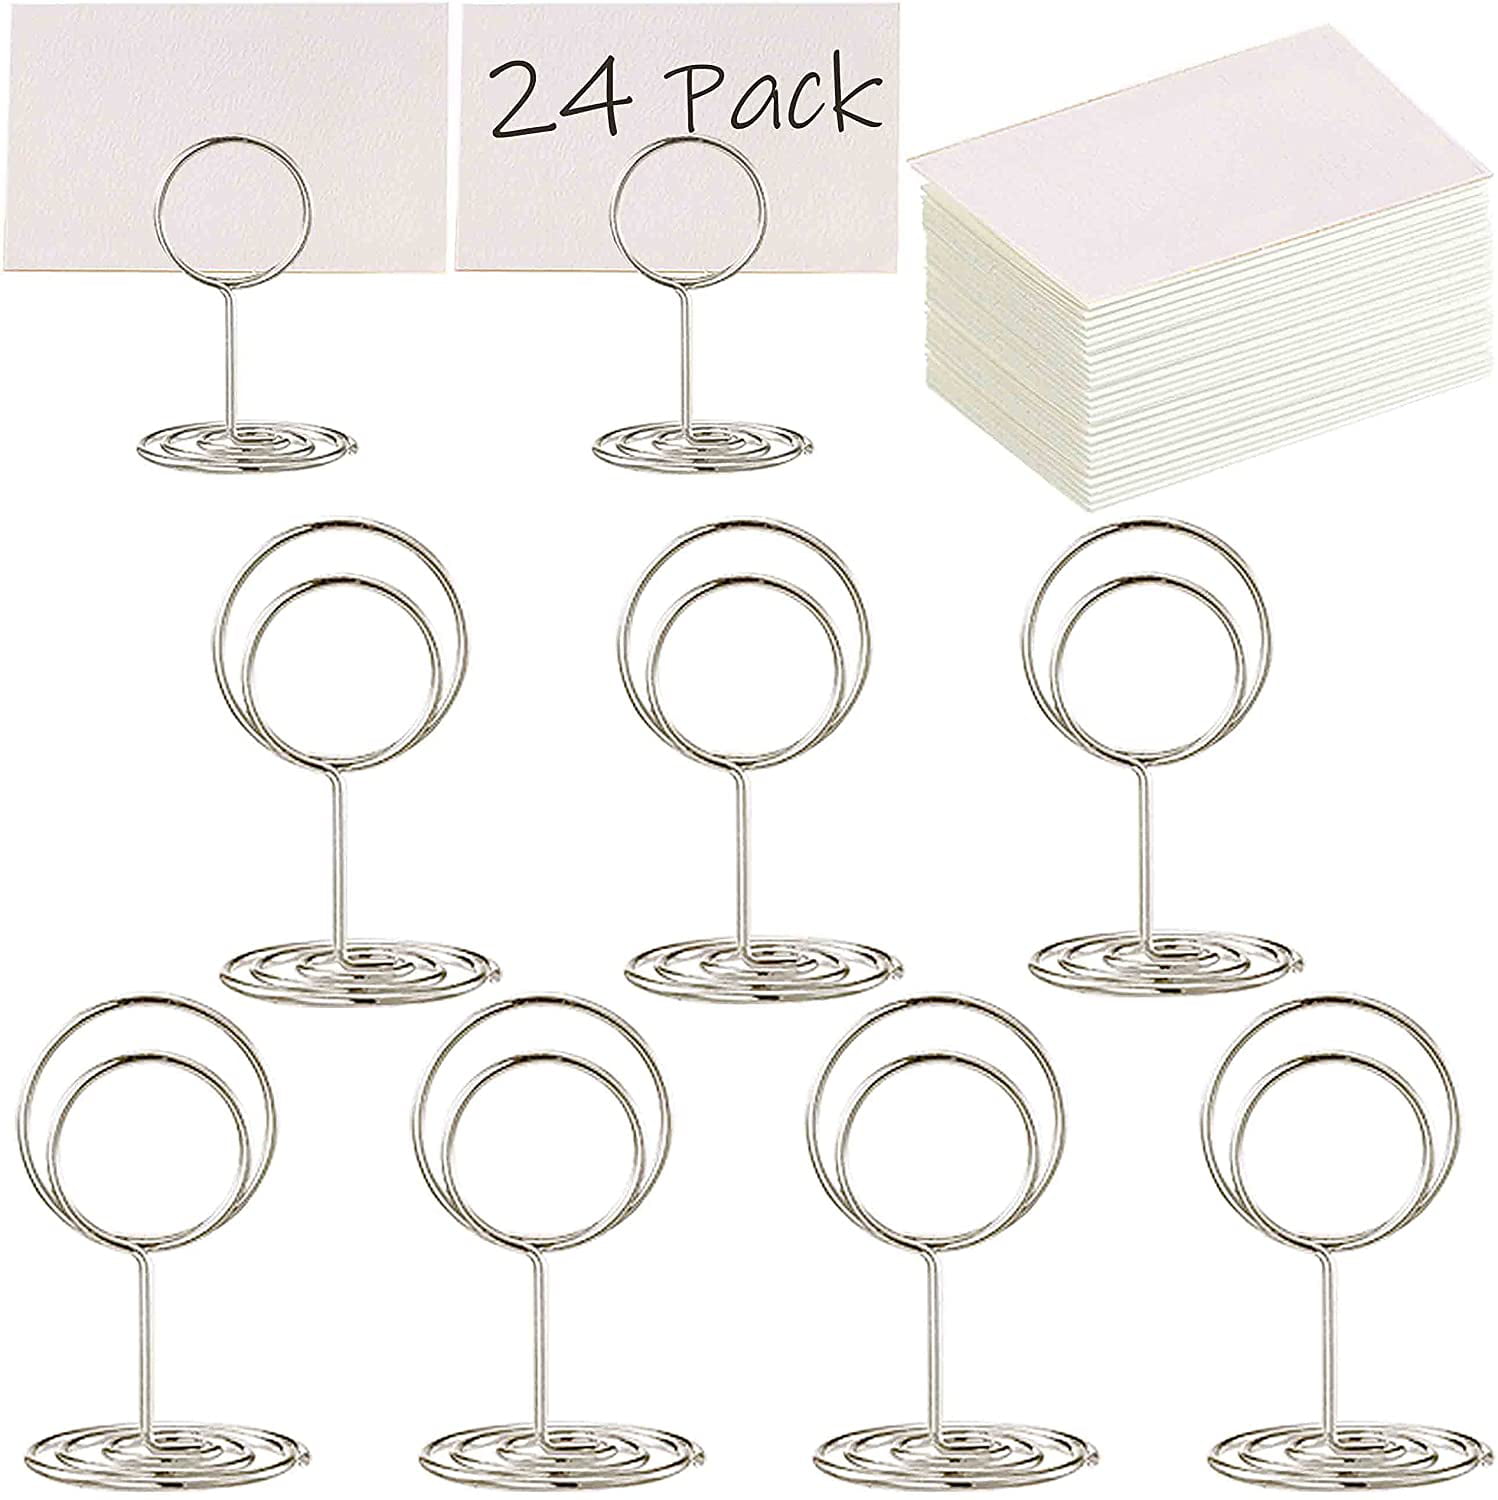 24pcs Bicycle Bike Name Number Place Card Holders Wedding Table Decoration 